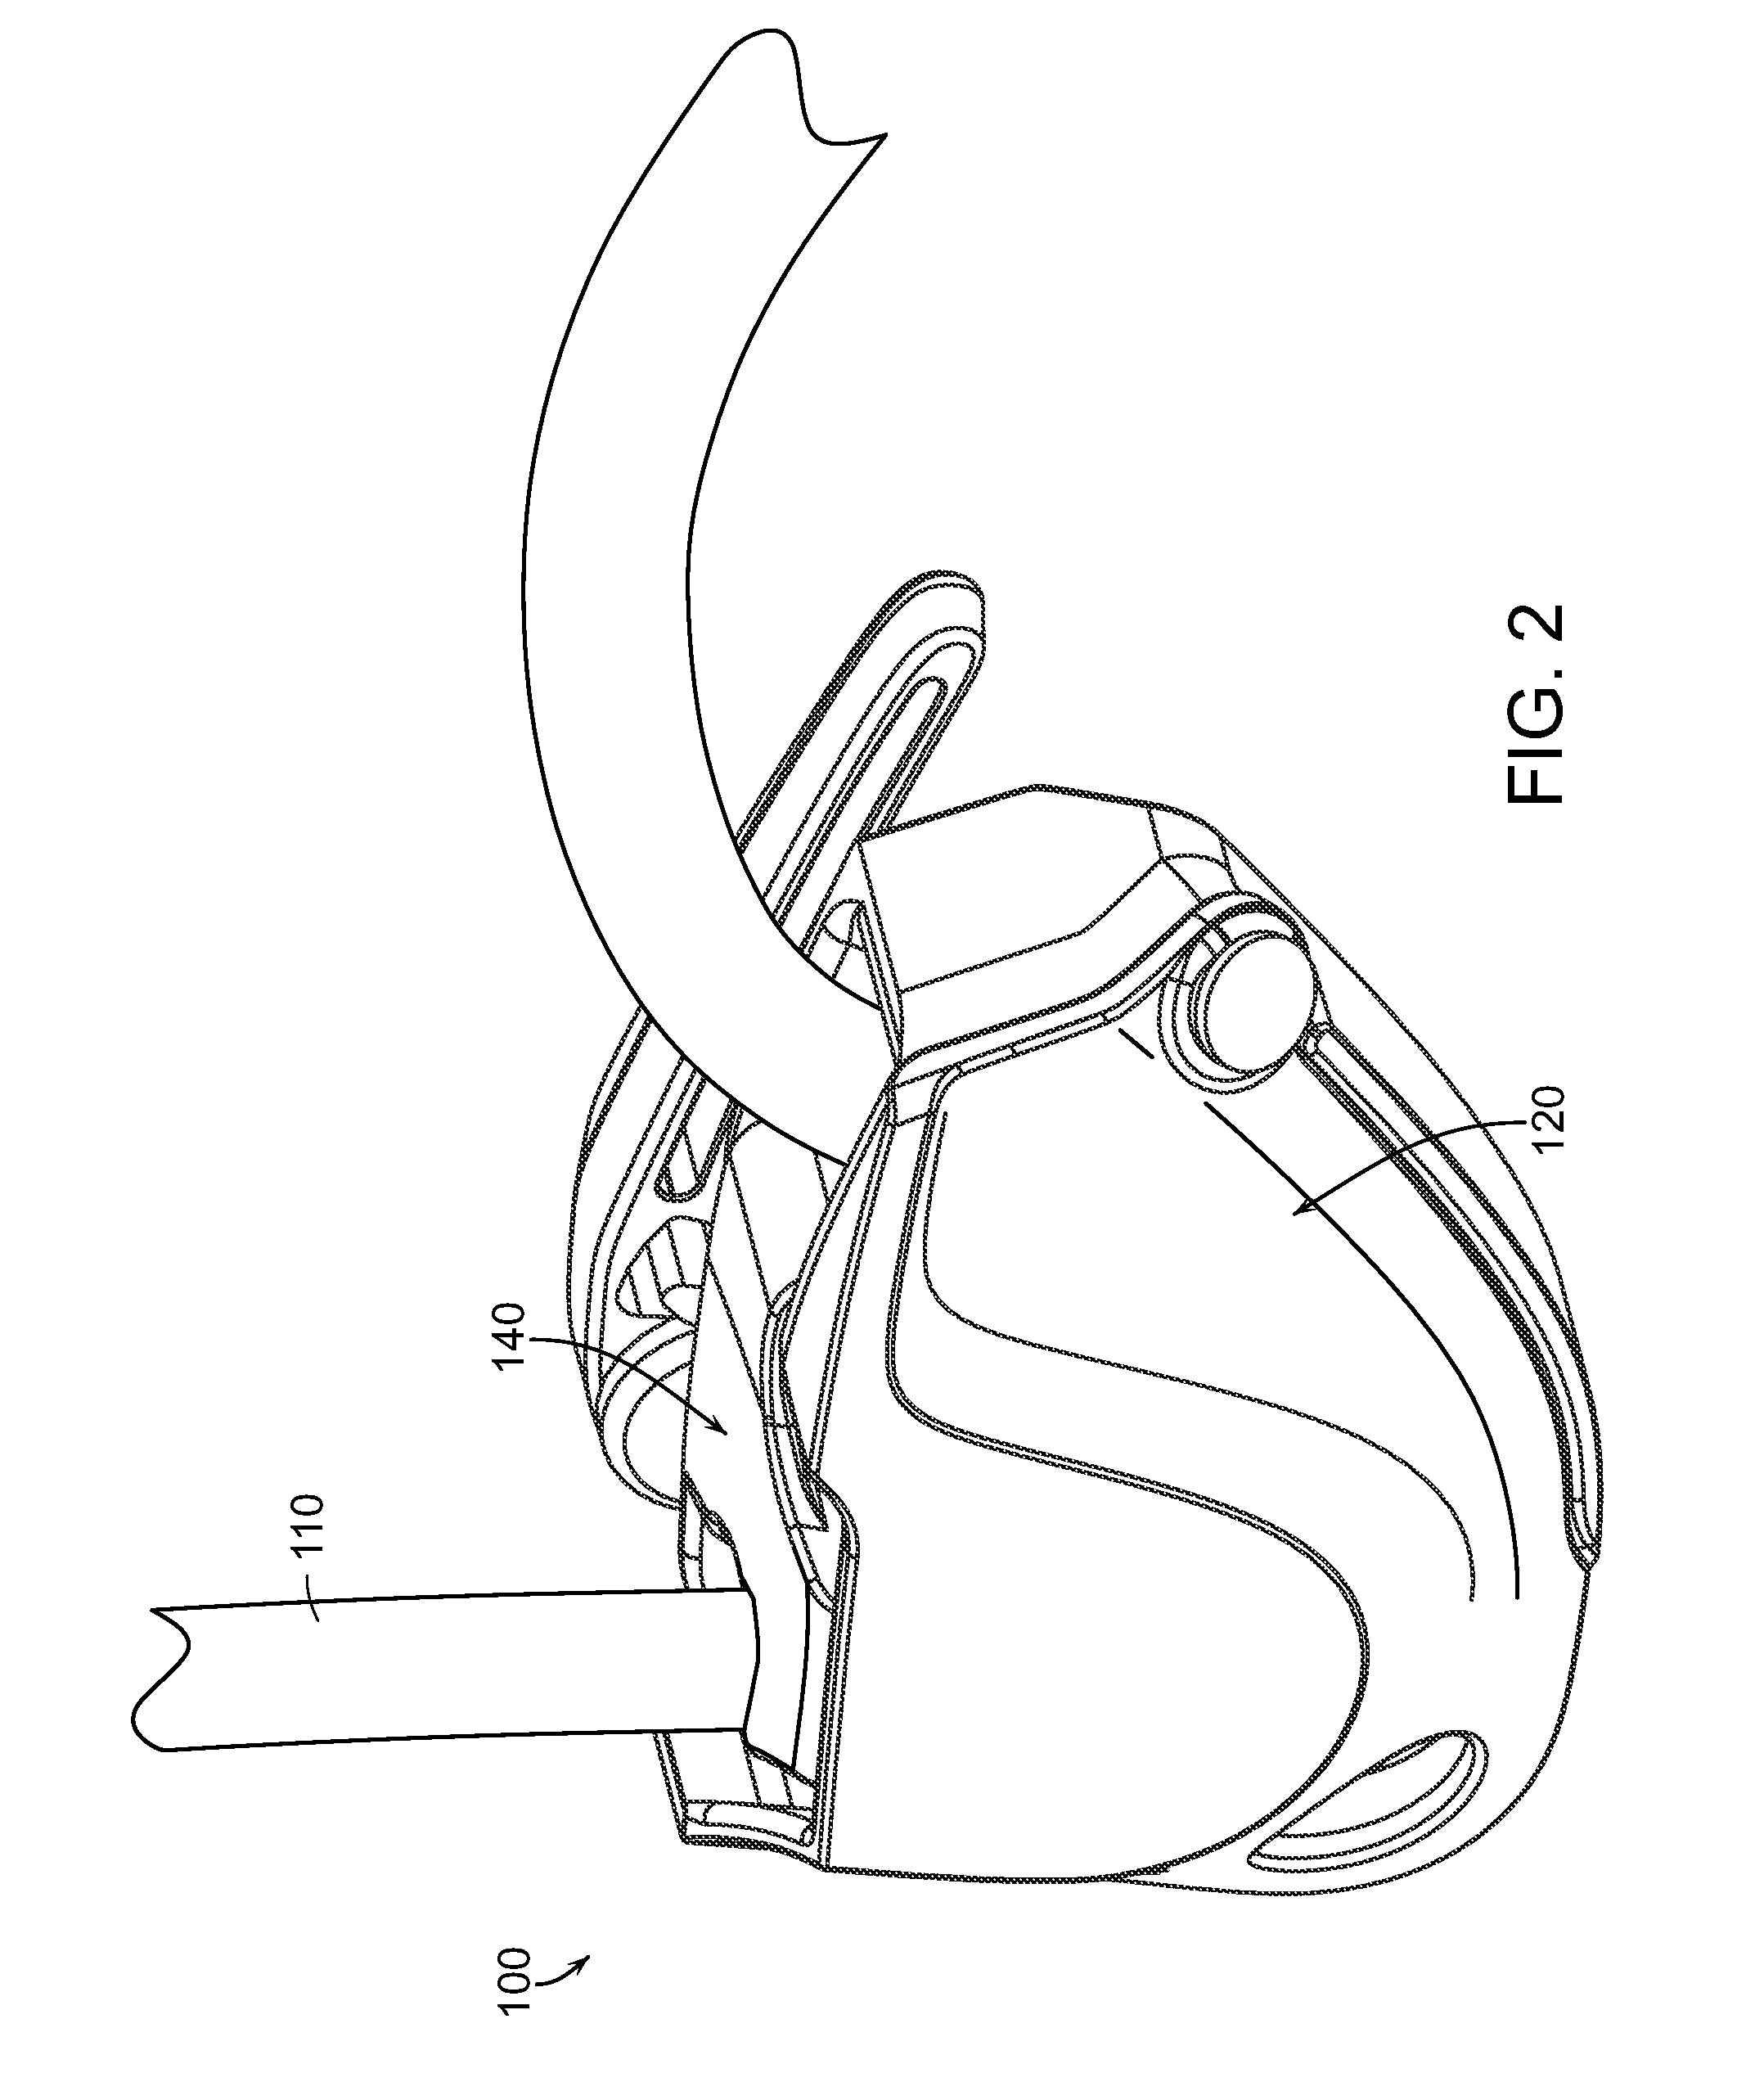 Systems for Assisted Braking Belay with a Cam-Clutch Mechanism